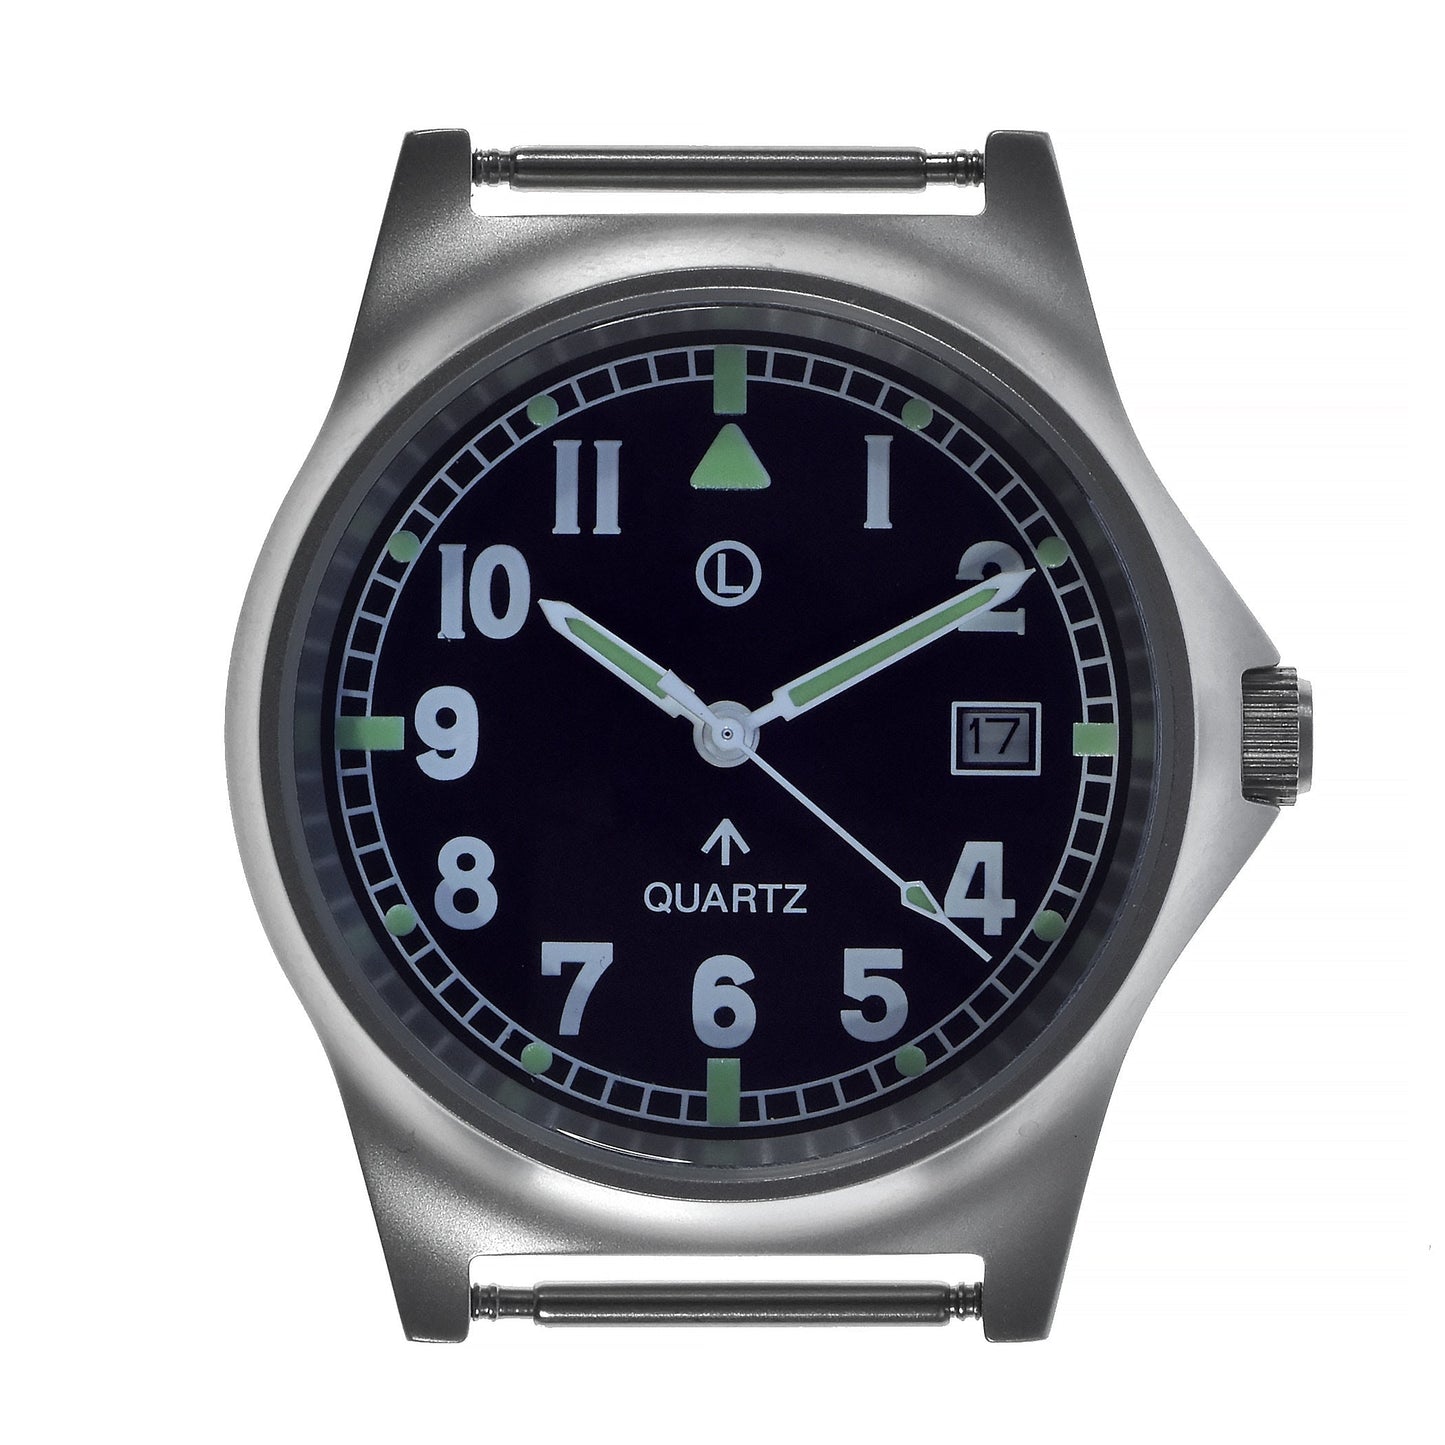 MWC G10 LM Stainless Steel Military Watch on a Olive Green NATO Strap (Sterile/Unbranded Dial)